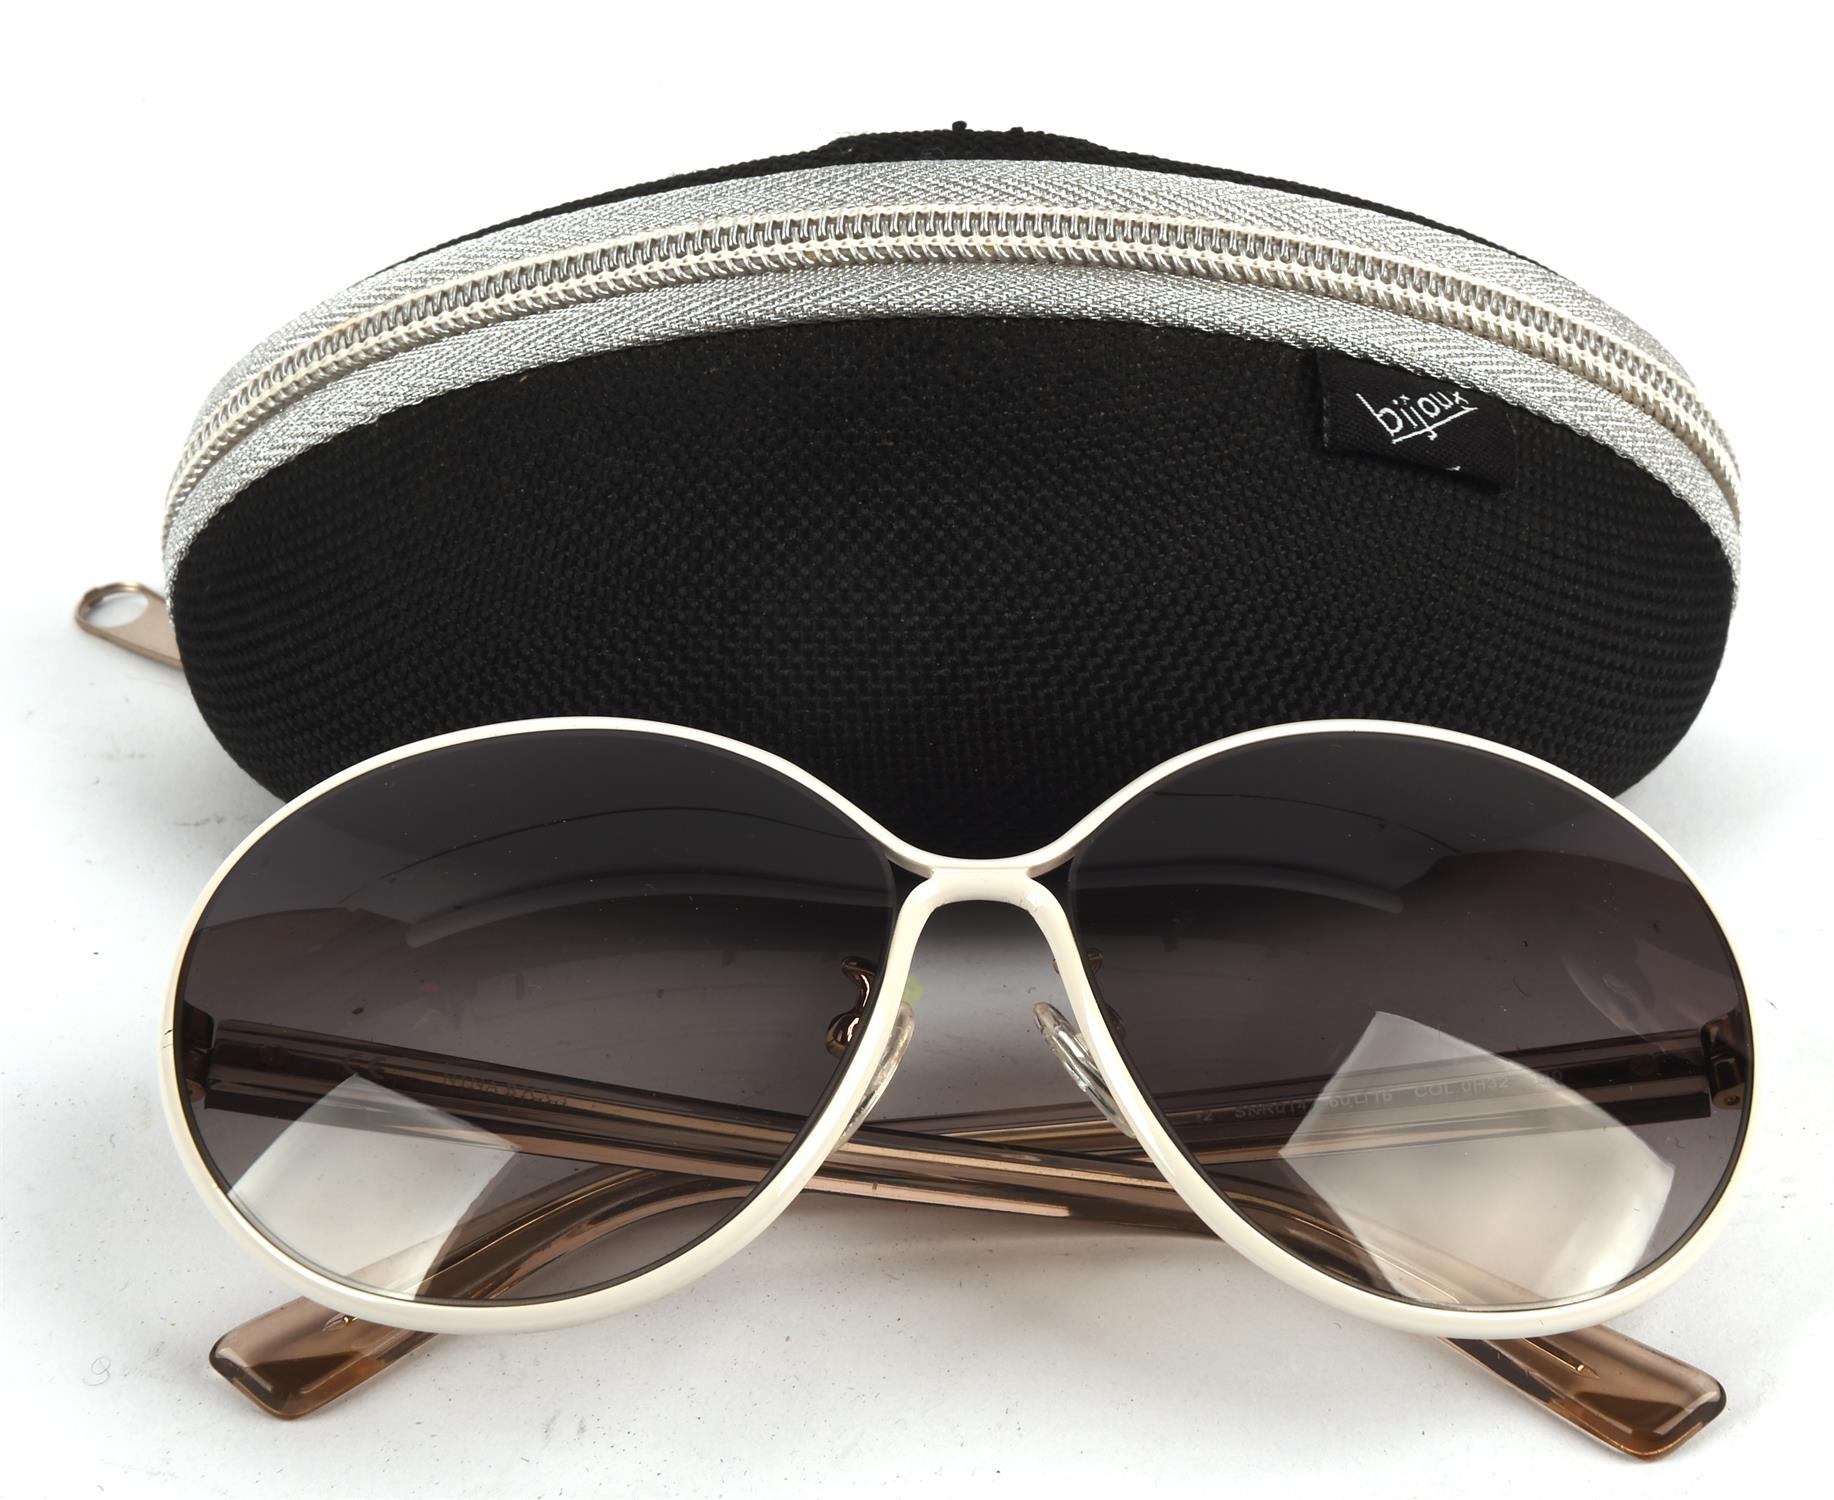 NINA RICCI a pair of ladies sunglasses in a black zipped case - Image 4 of 4